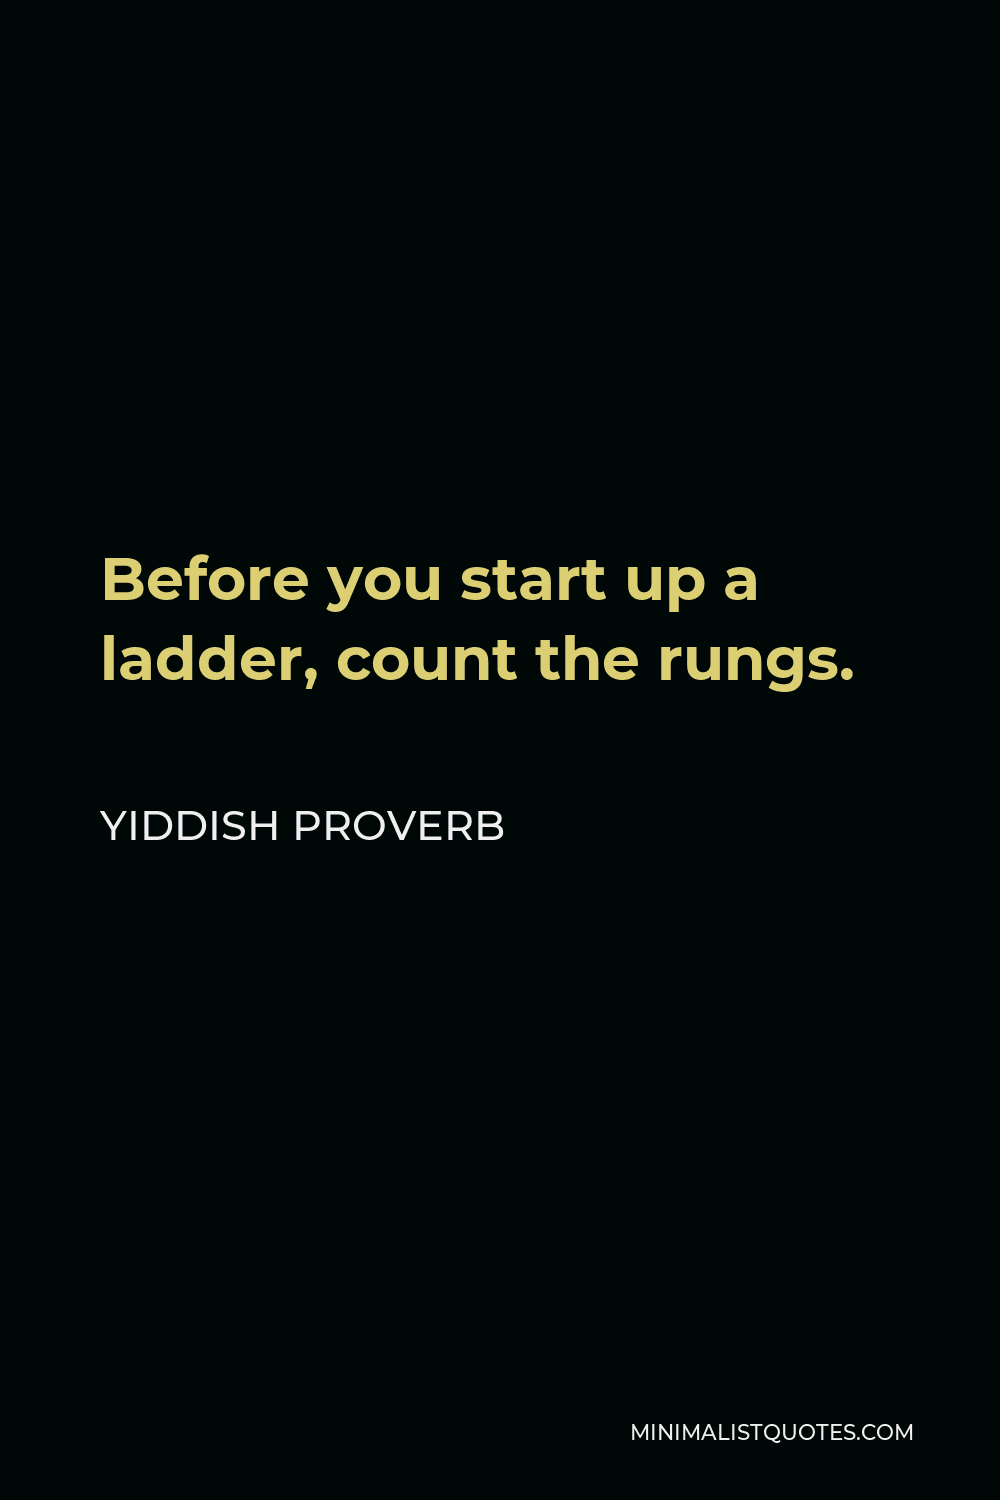 Yiddish Proverb Quote - Before you start up a ladder, count the rungs.